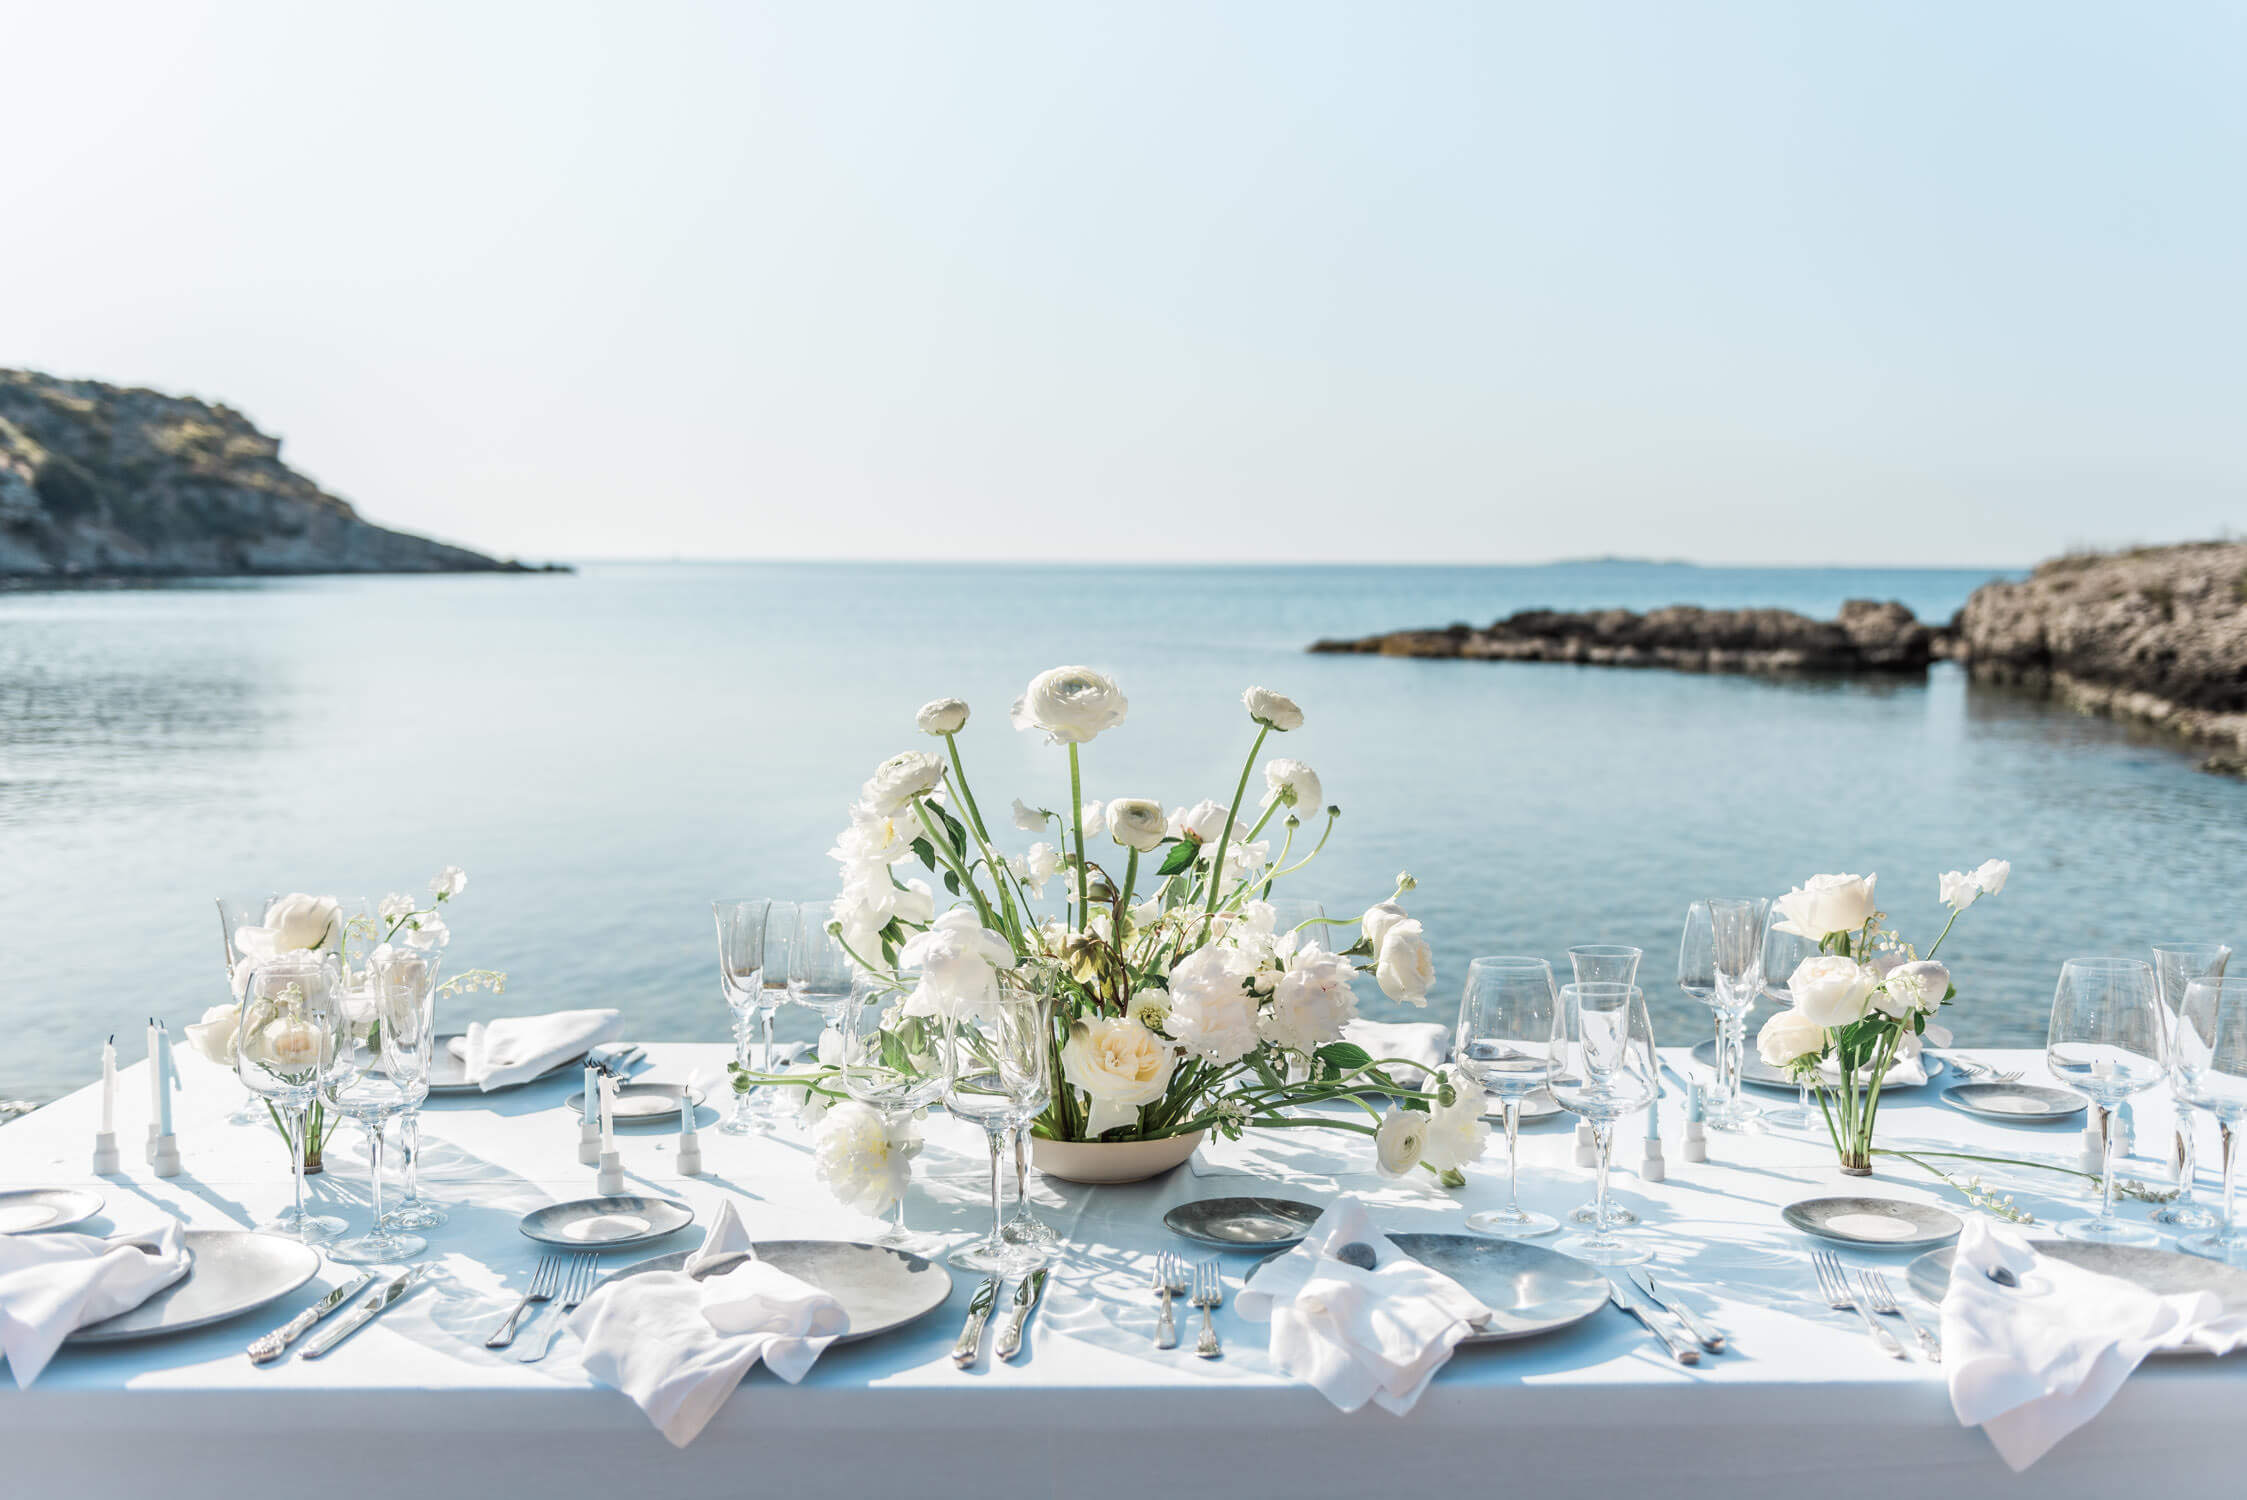 Delicious food is 1 of the reasons to choose Greece for your destination wedding